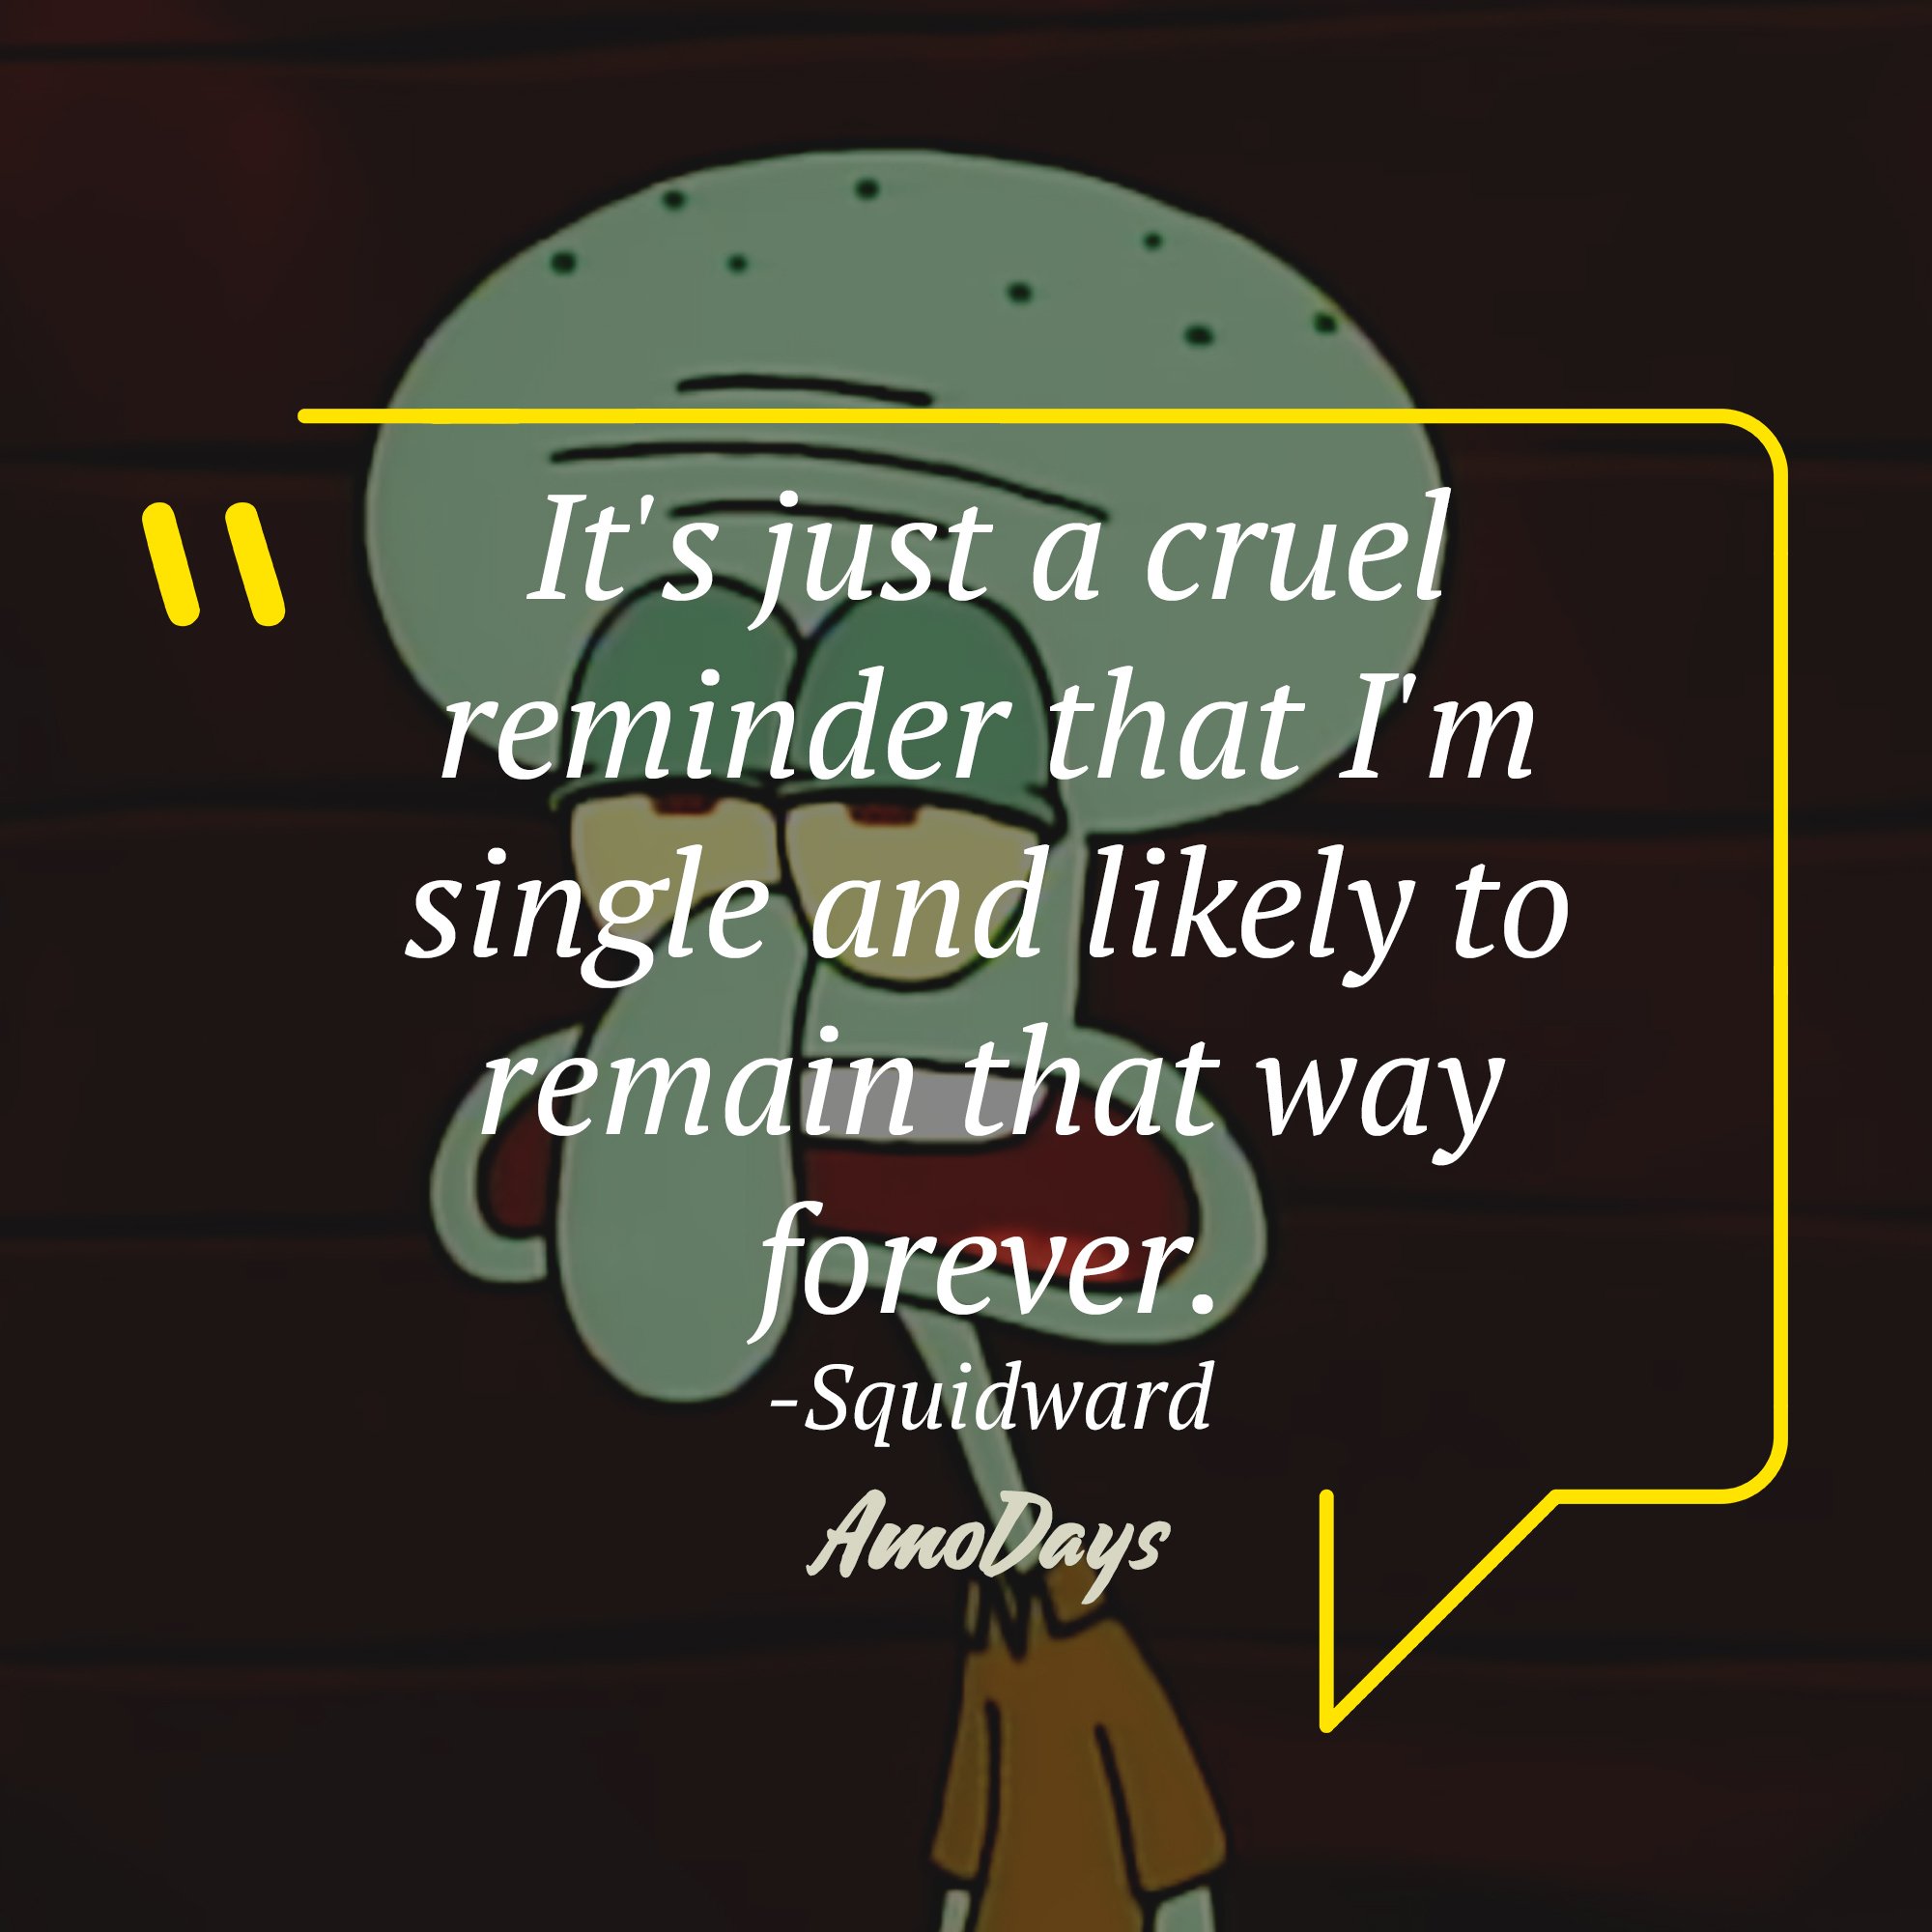 Squidward's quote: "It's just a cruel reminder that I'm single and likely to remain that way forever." | Source: AmoDays